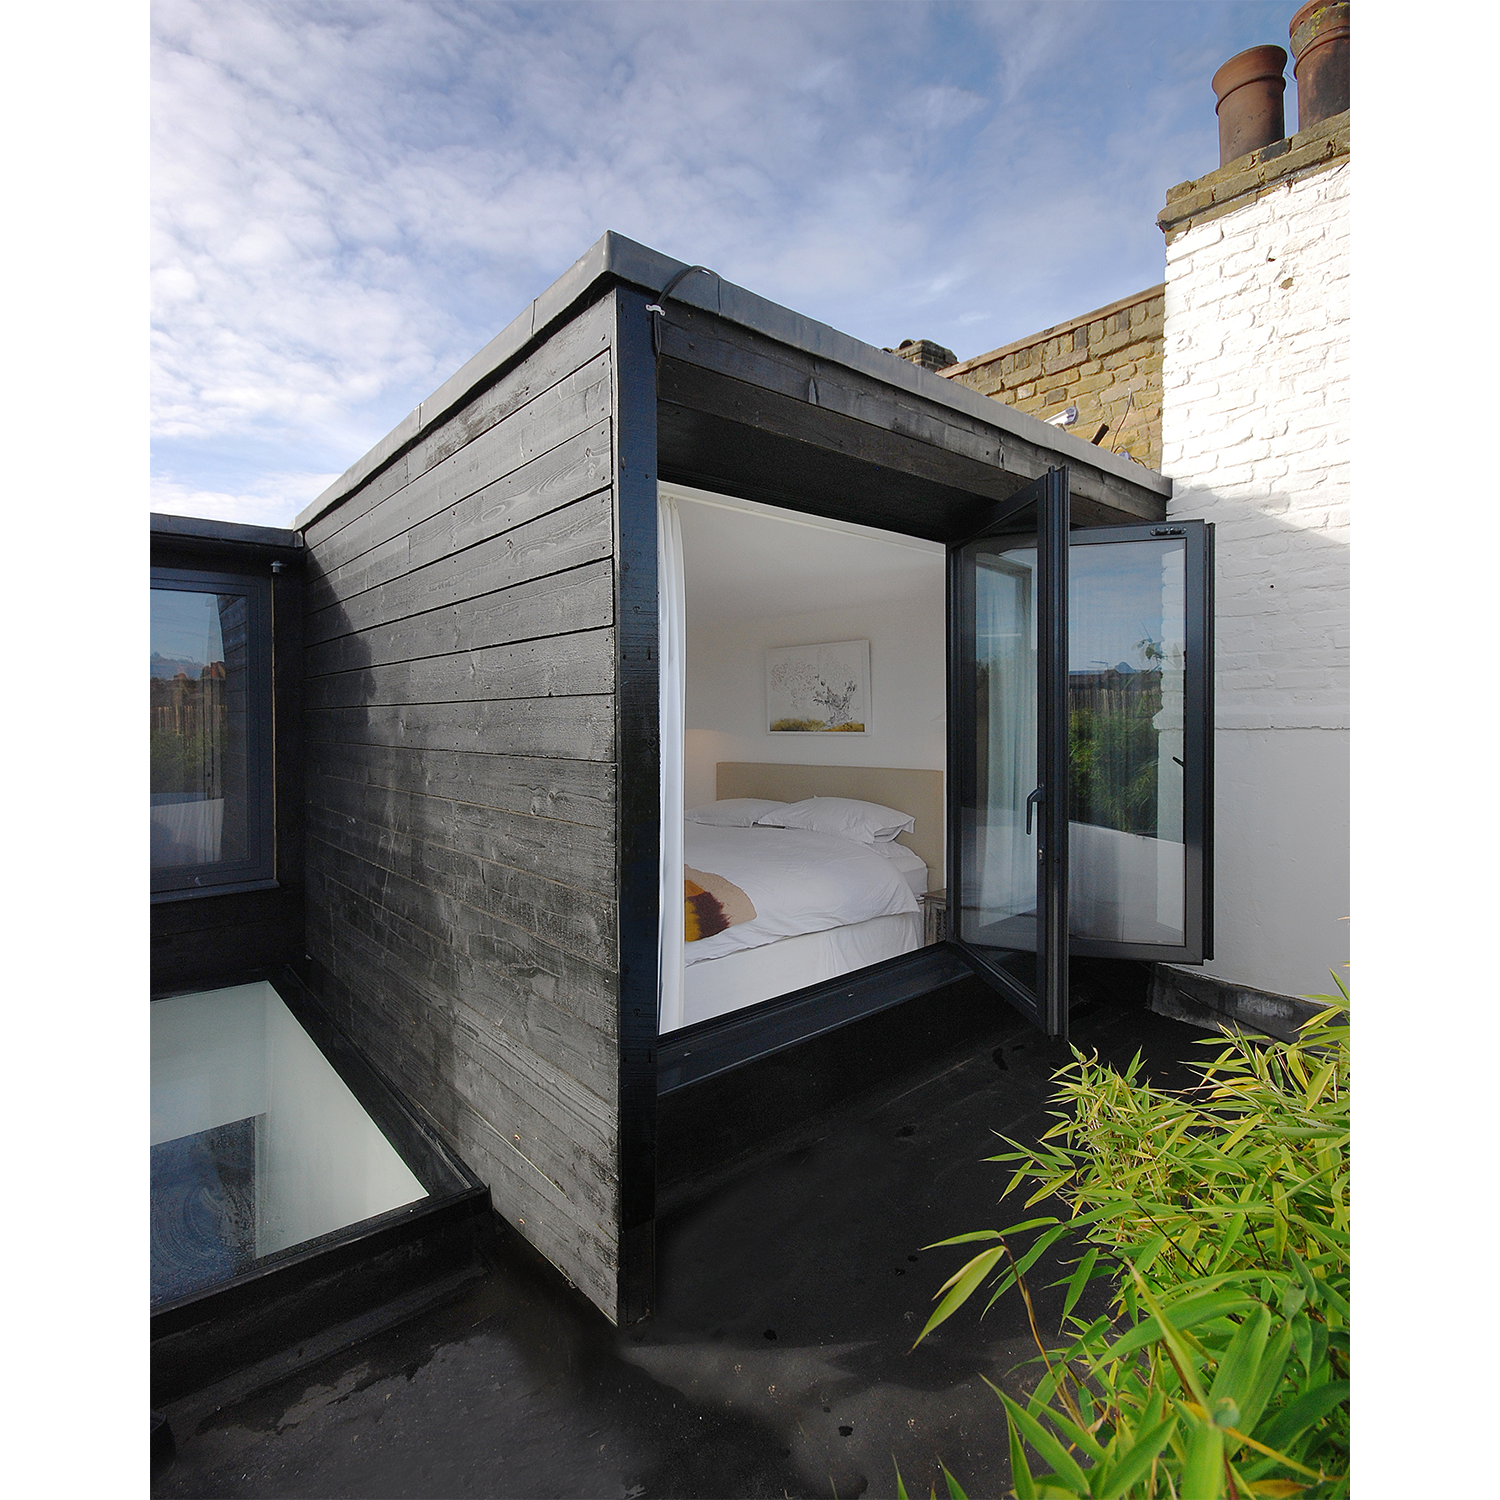 Latimer Road. Covered in Grand Designs Magazine as part of a feature on innovative loft extensions